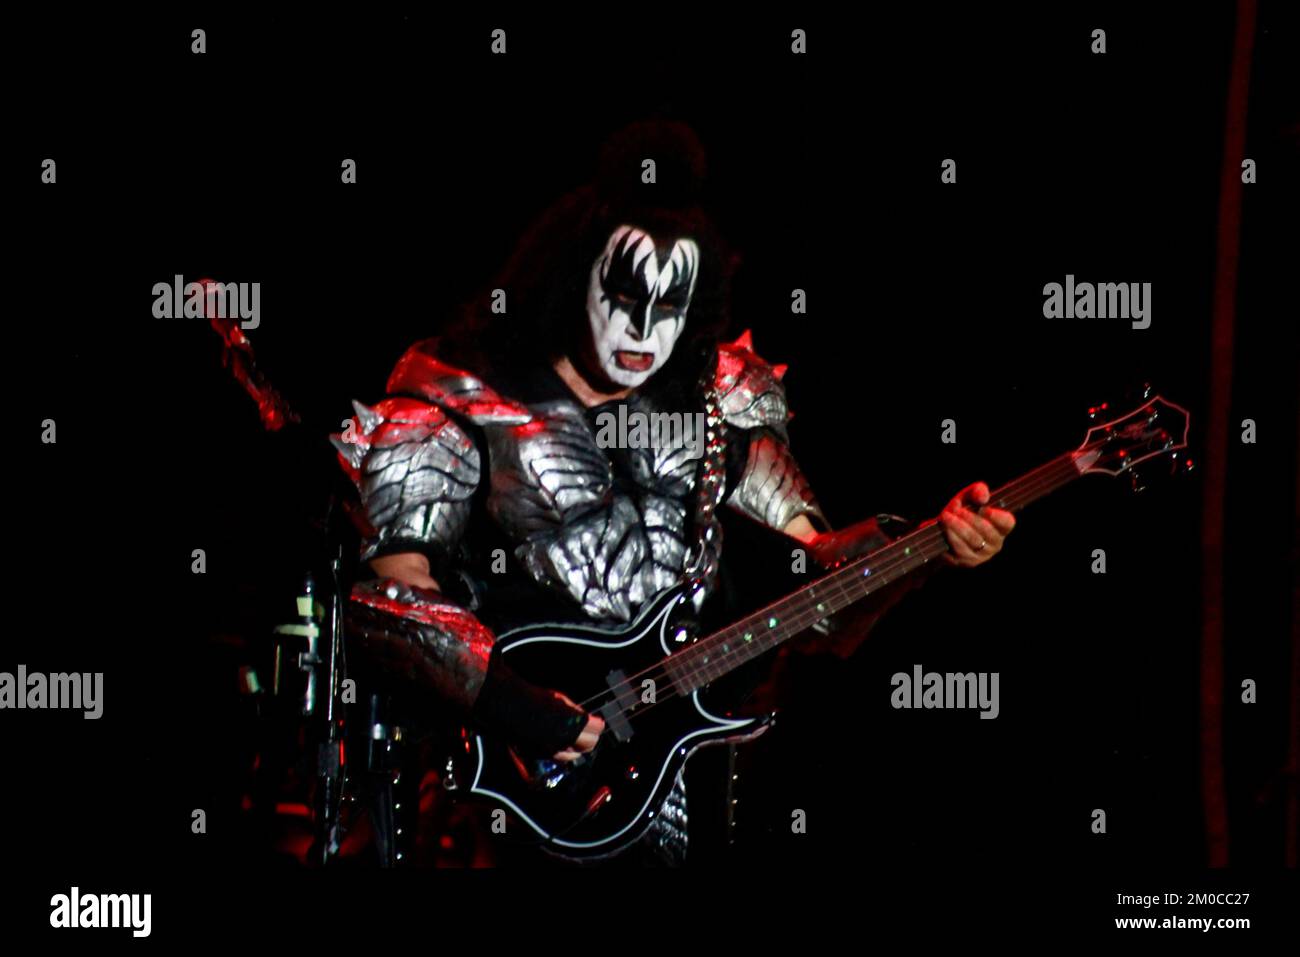 TOLUCA, MEXICO - DECEMBER 4: Gene Simmons integrant of the Kiss American rock band   performs on stage during  the third day of the Hell and Heaven Metal Fest at Foro Pegaso. On December 04, 2022 in Toluca, Mexico. Stock Photo